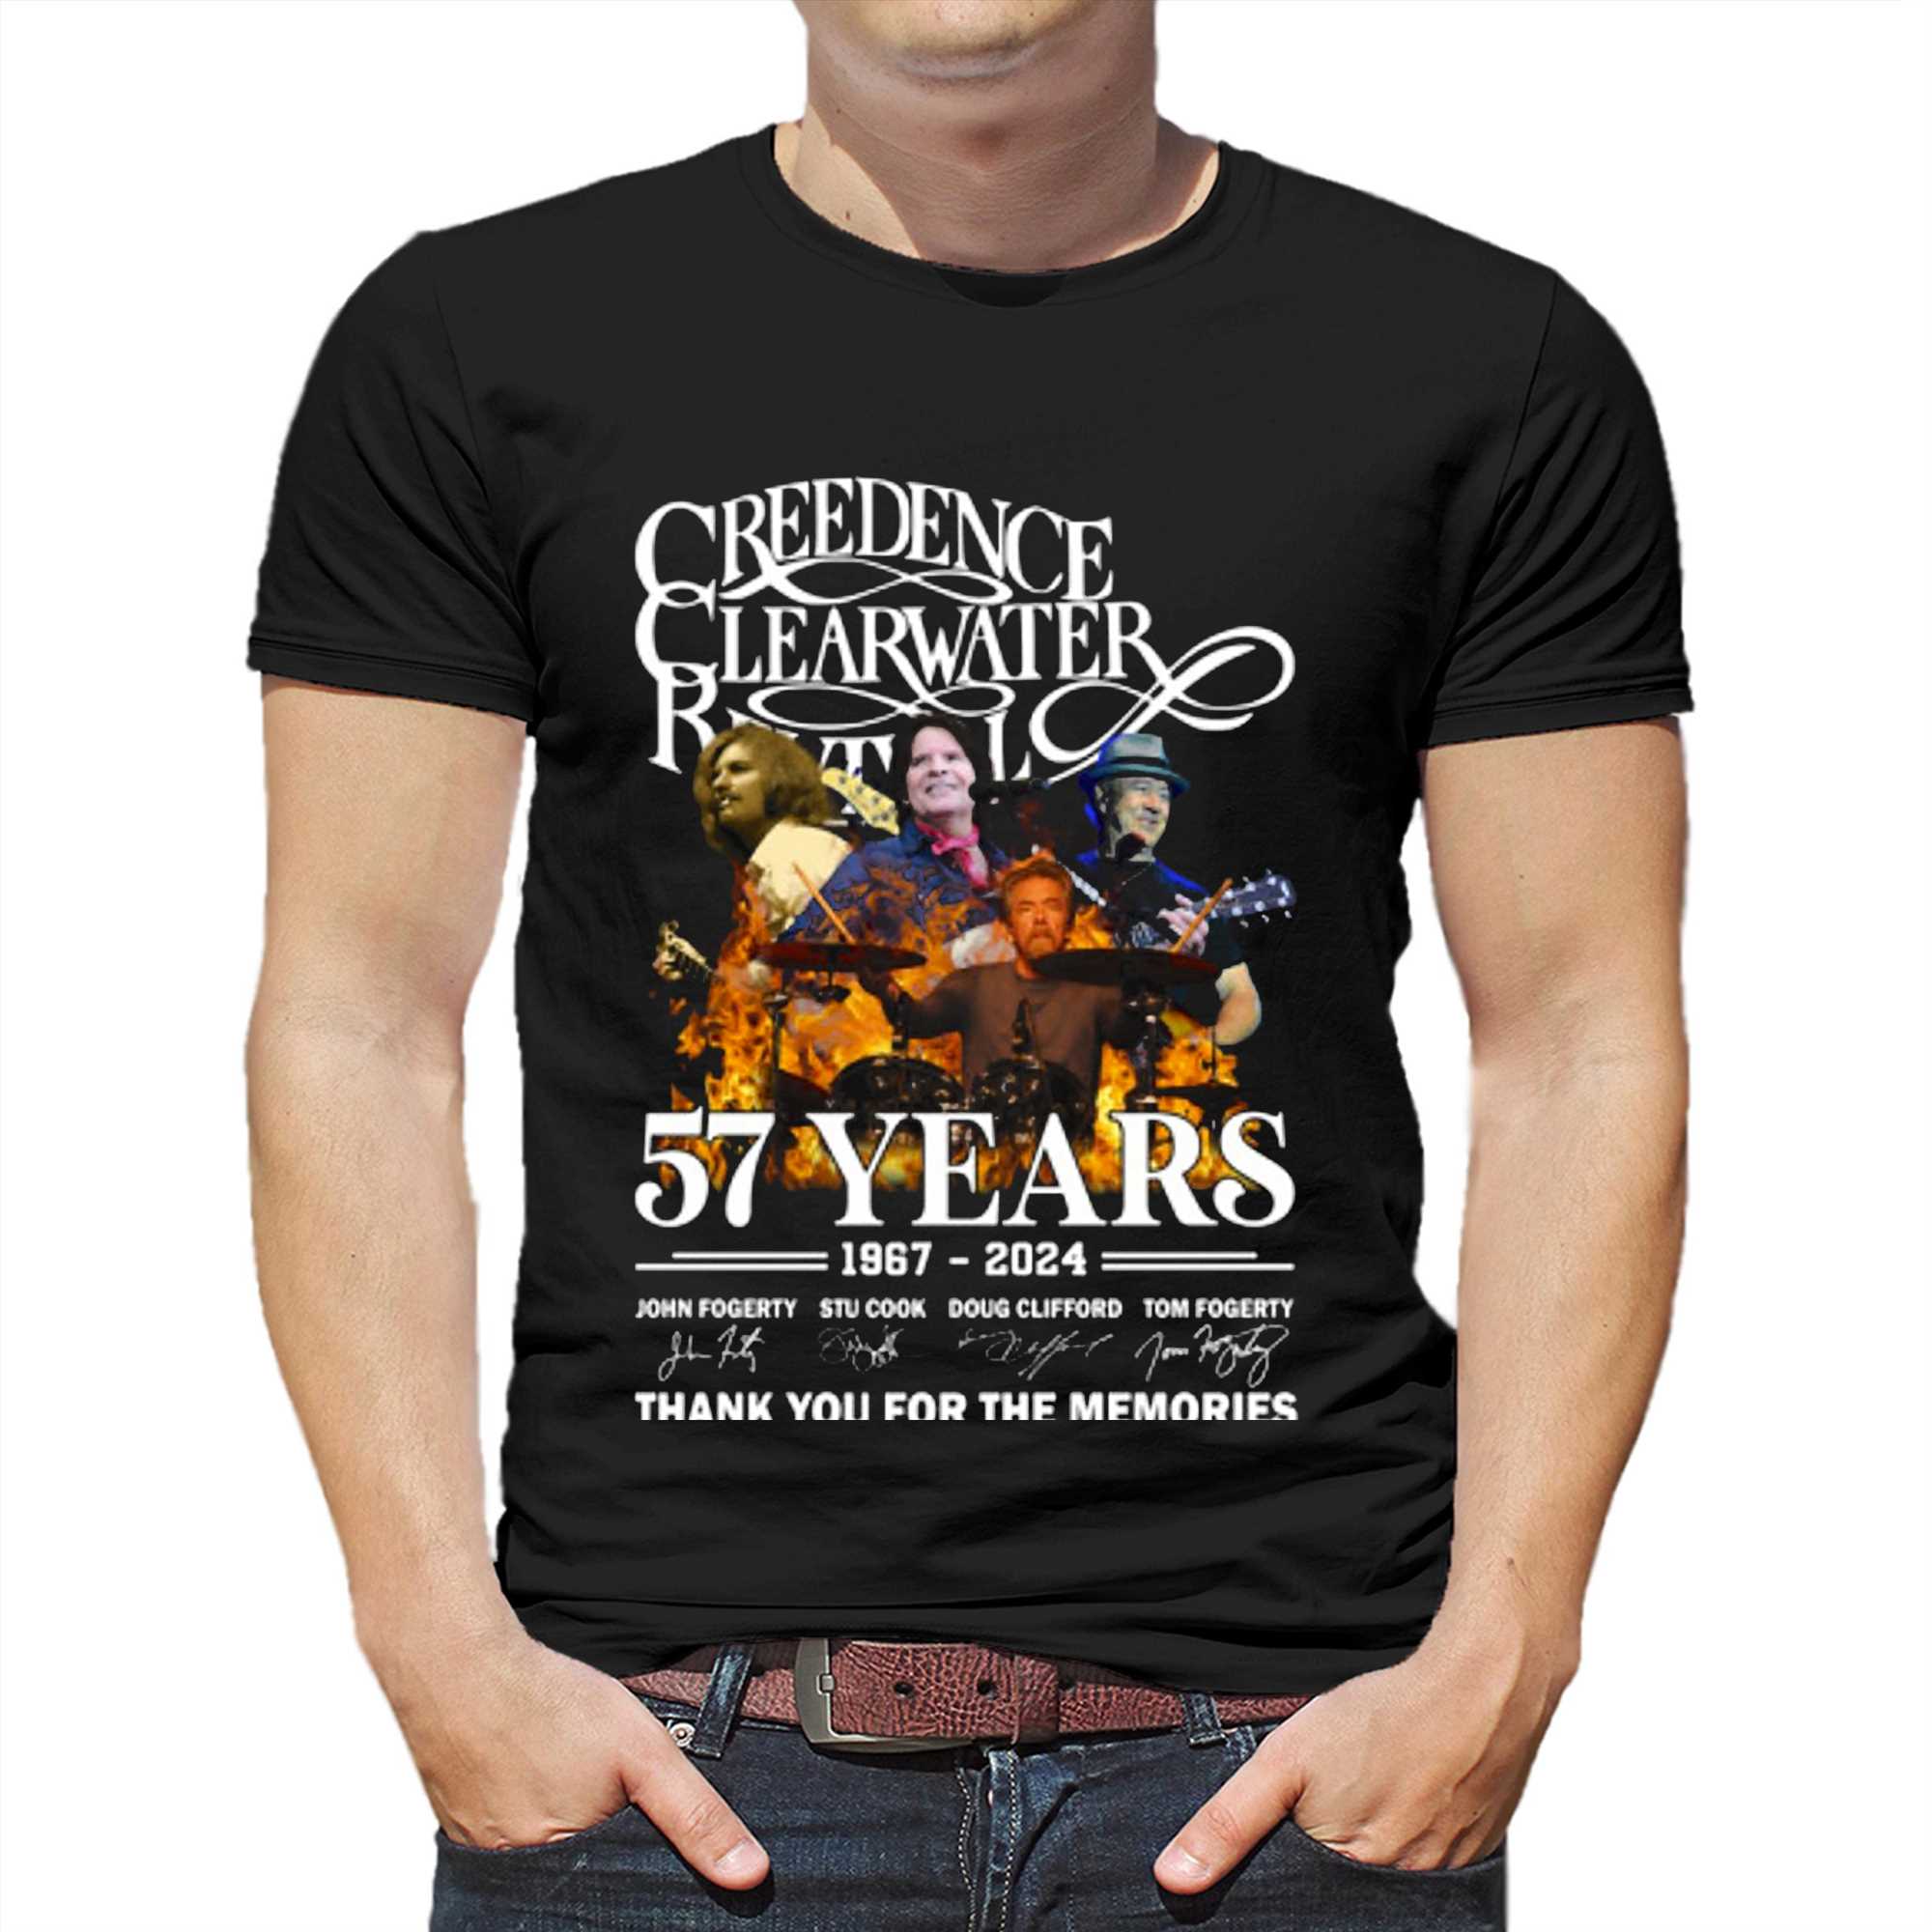 Creedence Clearwater Revival 57 Years 1967 2024 Thank You For The